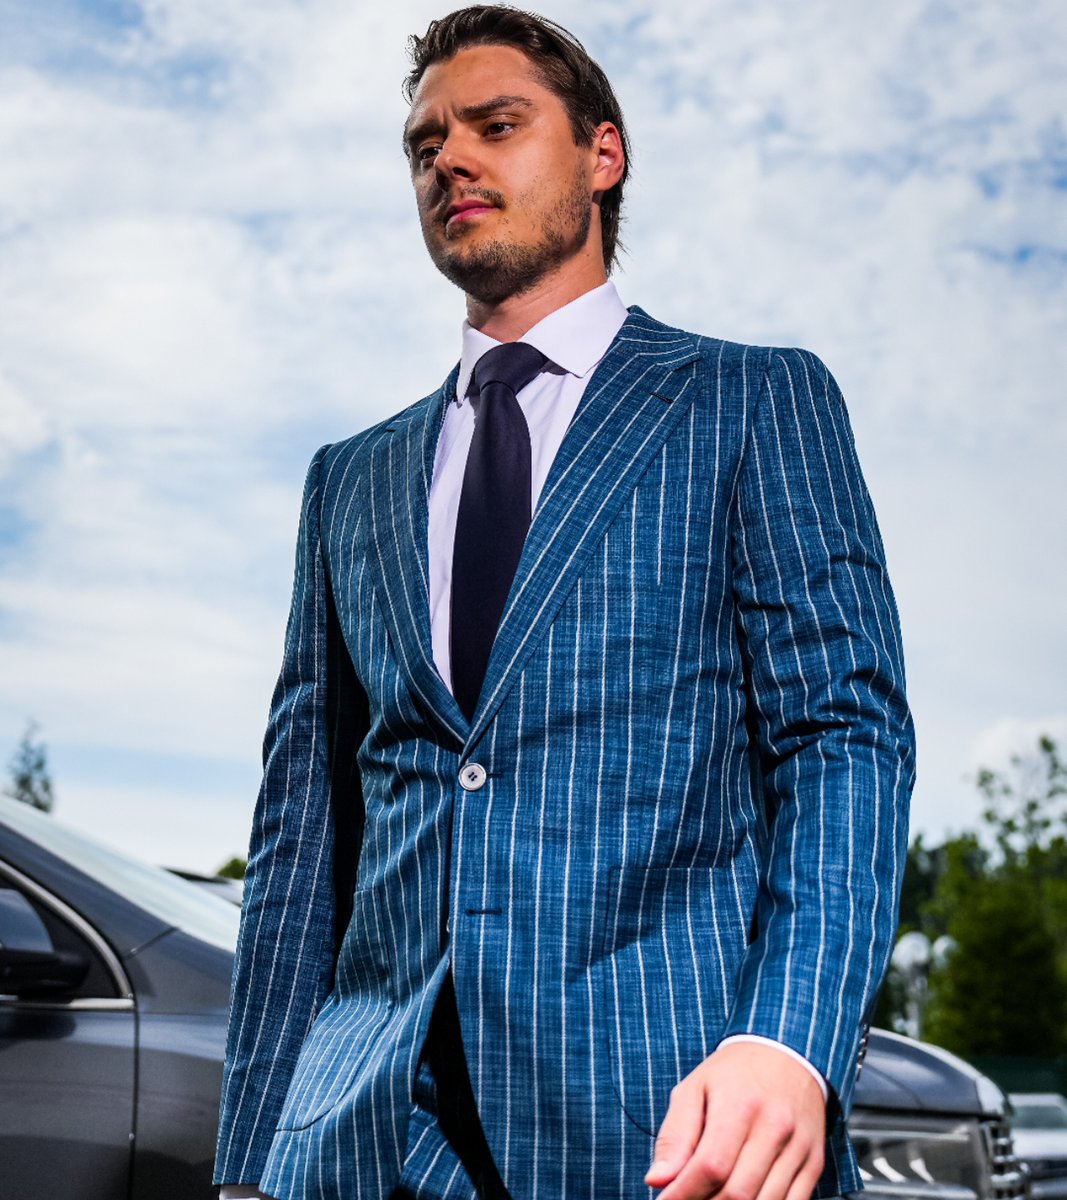 It's time to put some respect on Sebastian Aho's playoff suit game